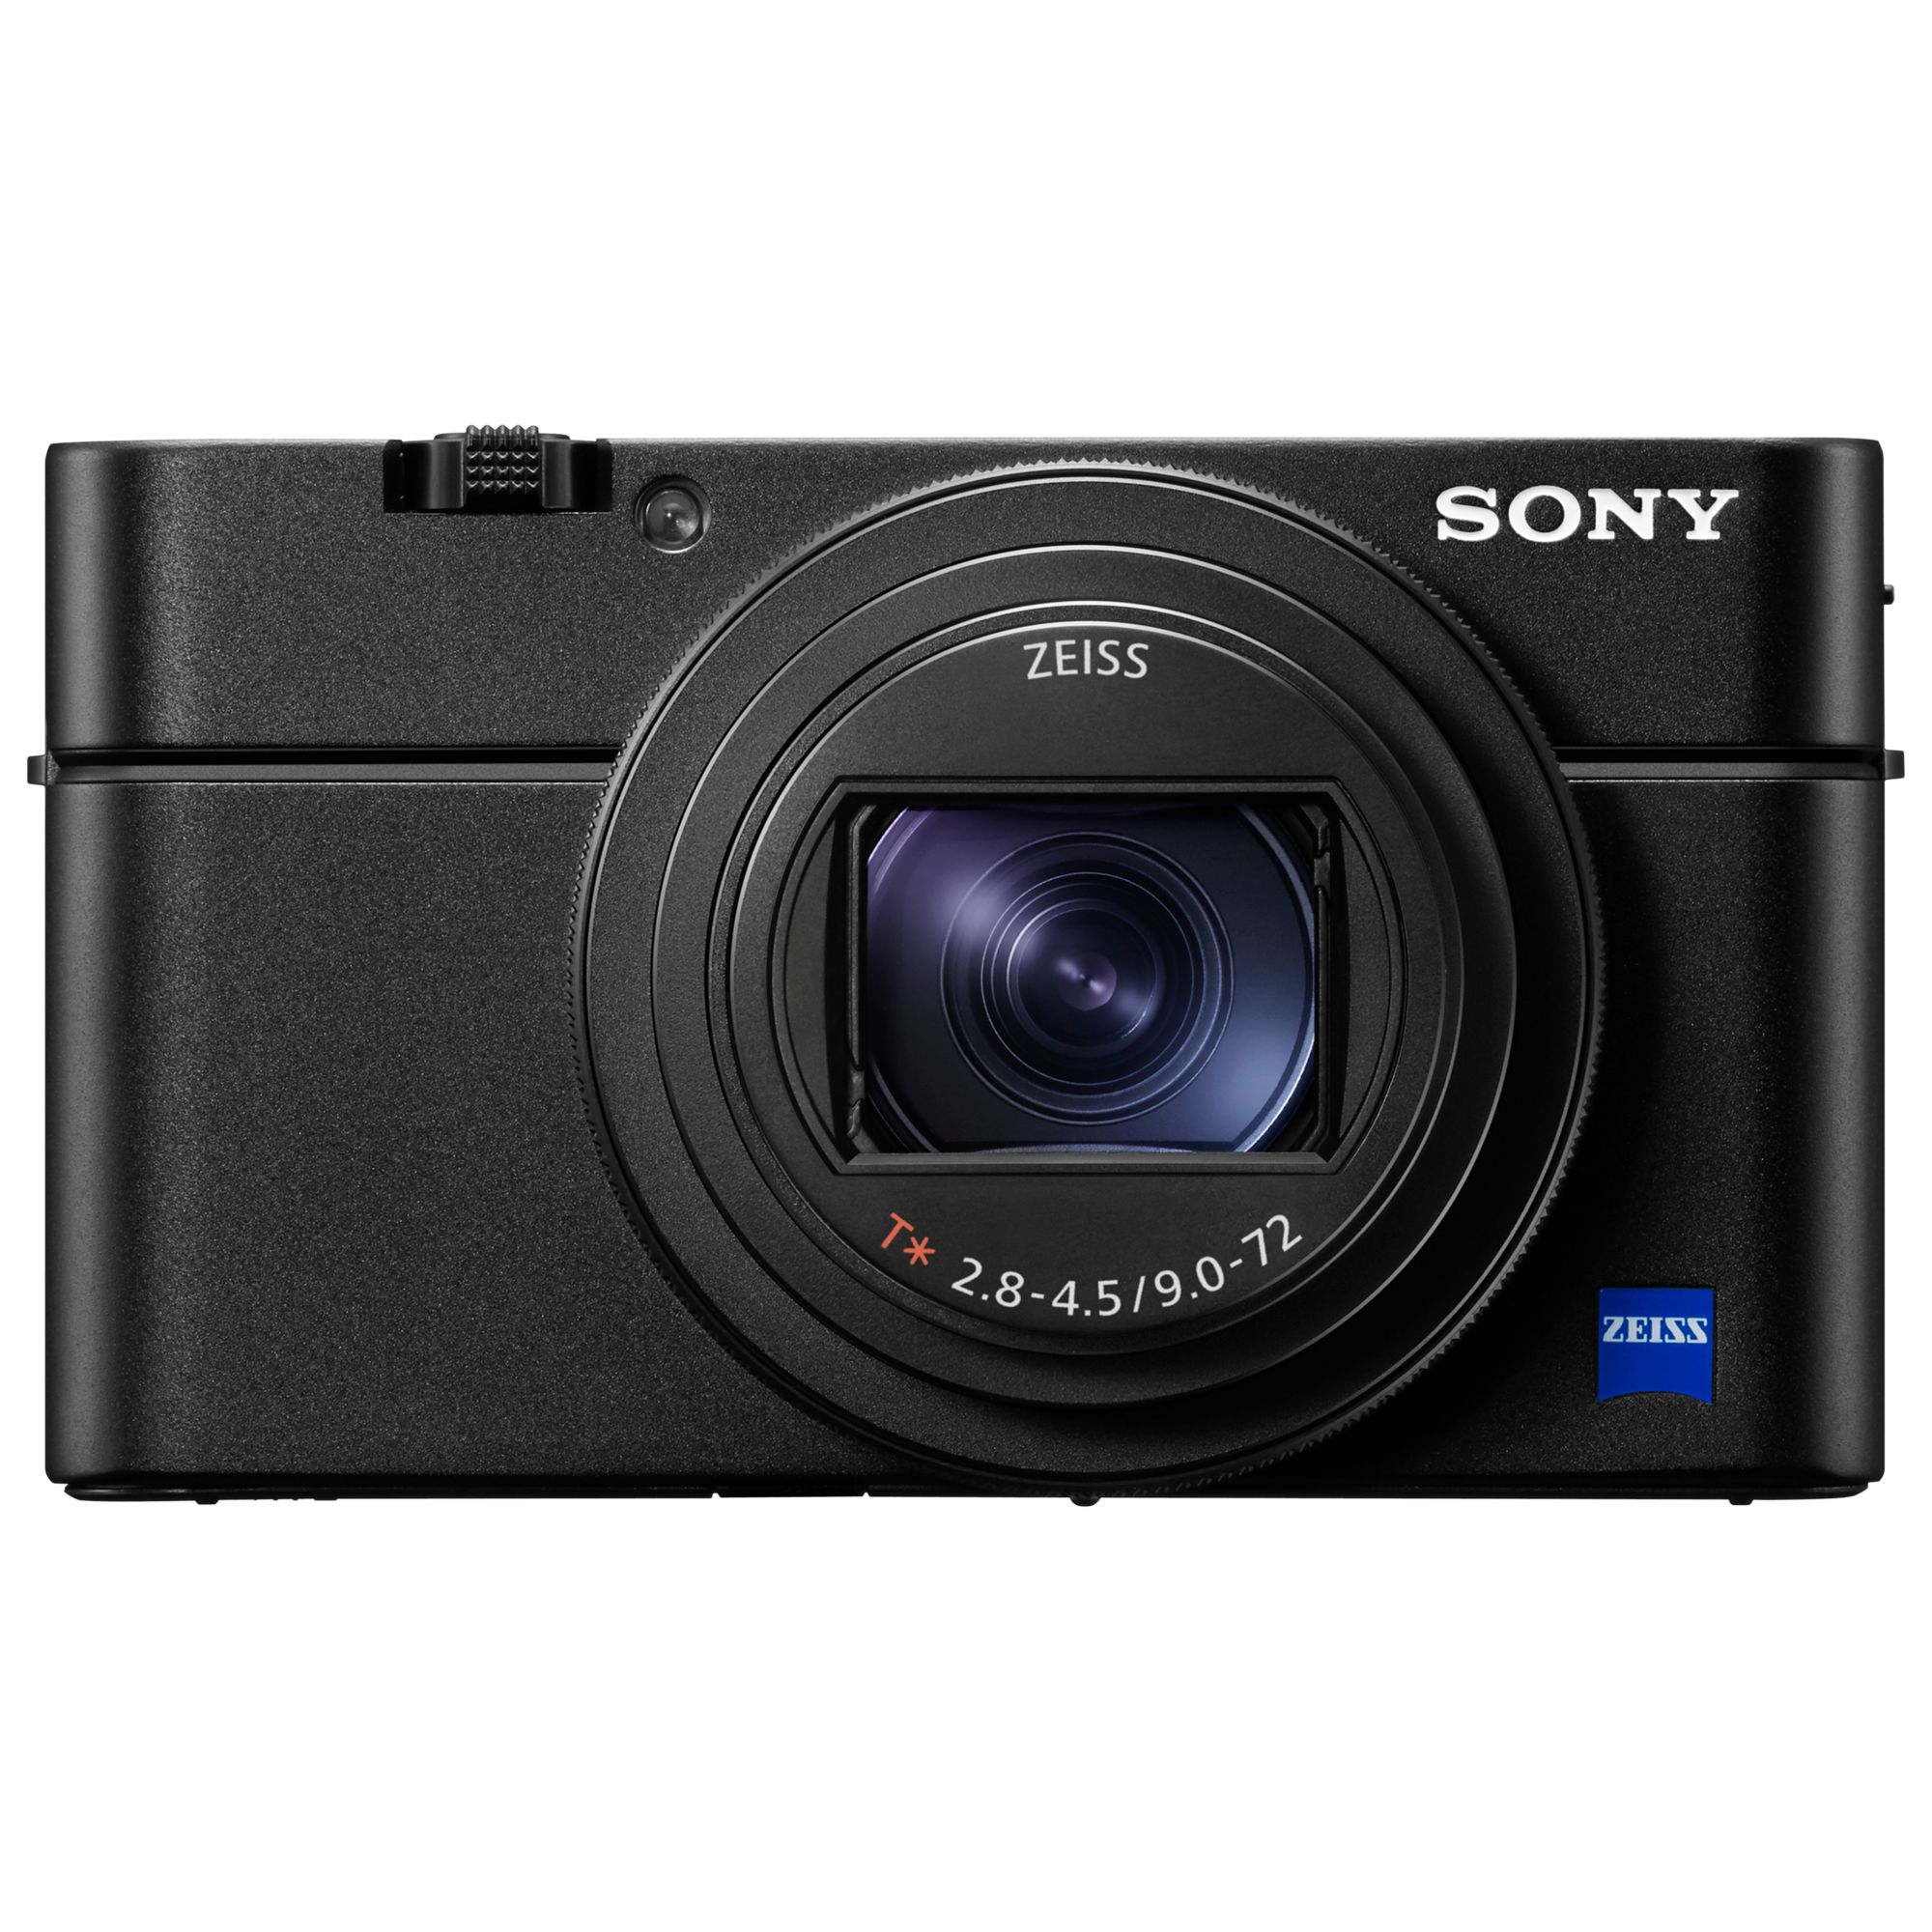 Image of Sony Cybershot DSCRX100 VI Camera 4K 201MP 8x Optical Zoom WiFi Bluetooth NFC OLED EVF 3 Tiltable Touch Screen